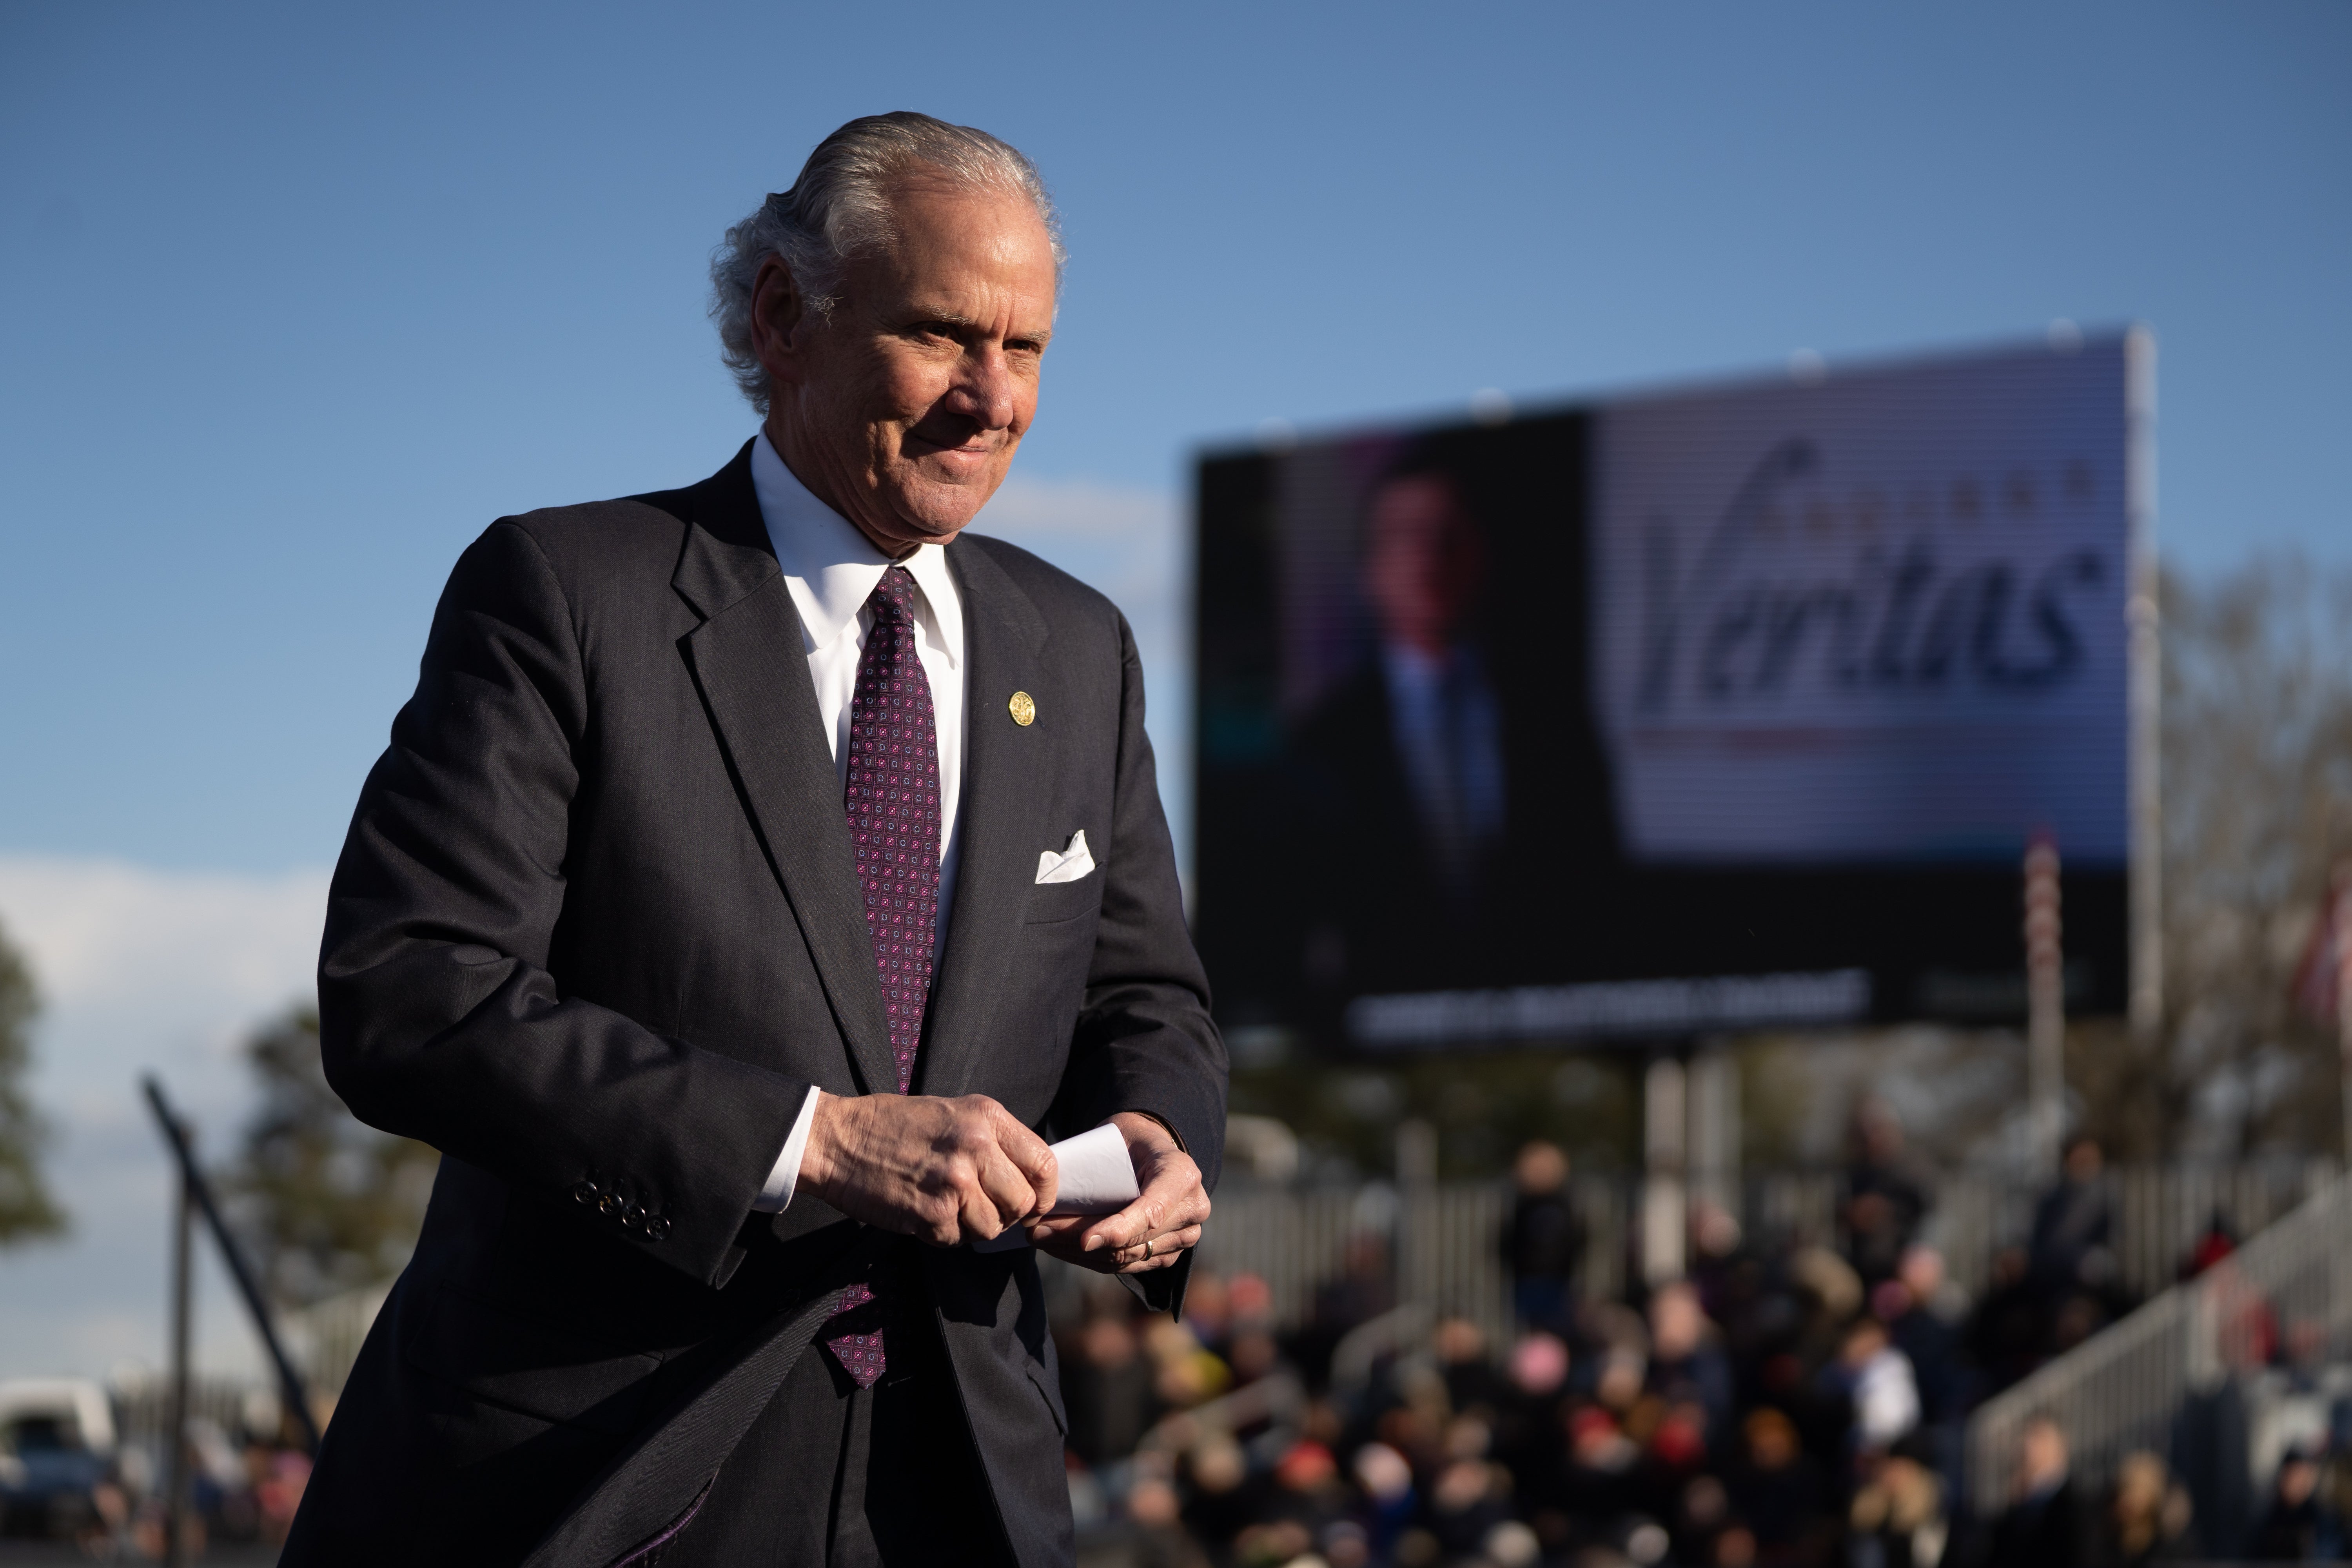 South Carolina Gov. Henry McMaster walks off the stage during a rally with former U.S. President Donald Trump at the Florence Regional Airport on March 12, 2022 in Florence, South Carolina. The visit by Trump is his first rally in South Carolina since his election loss in 2020